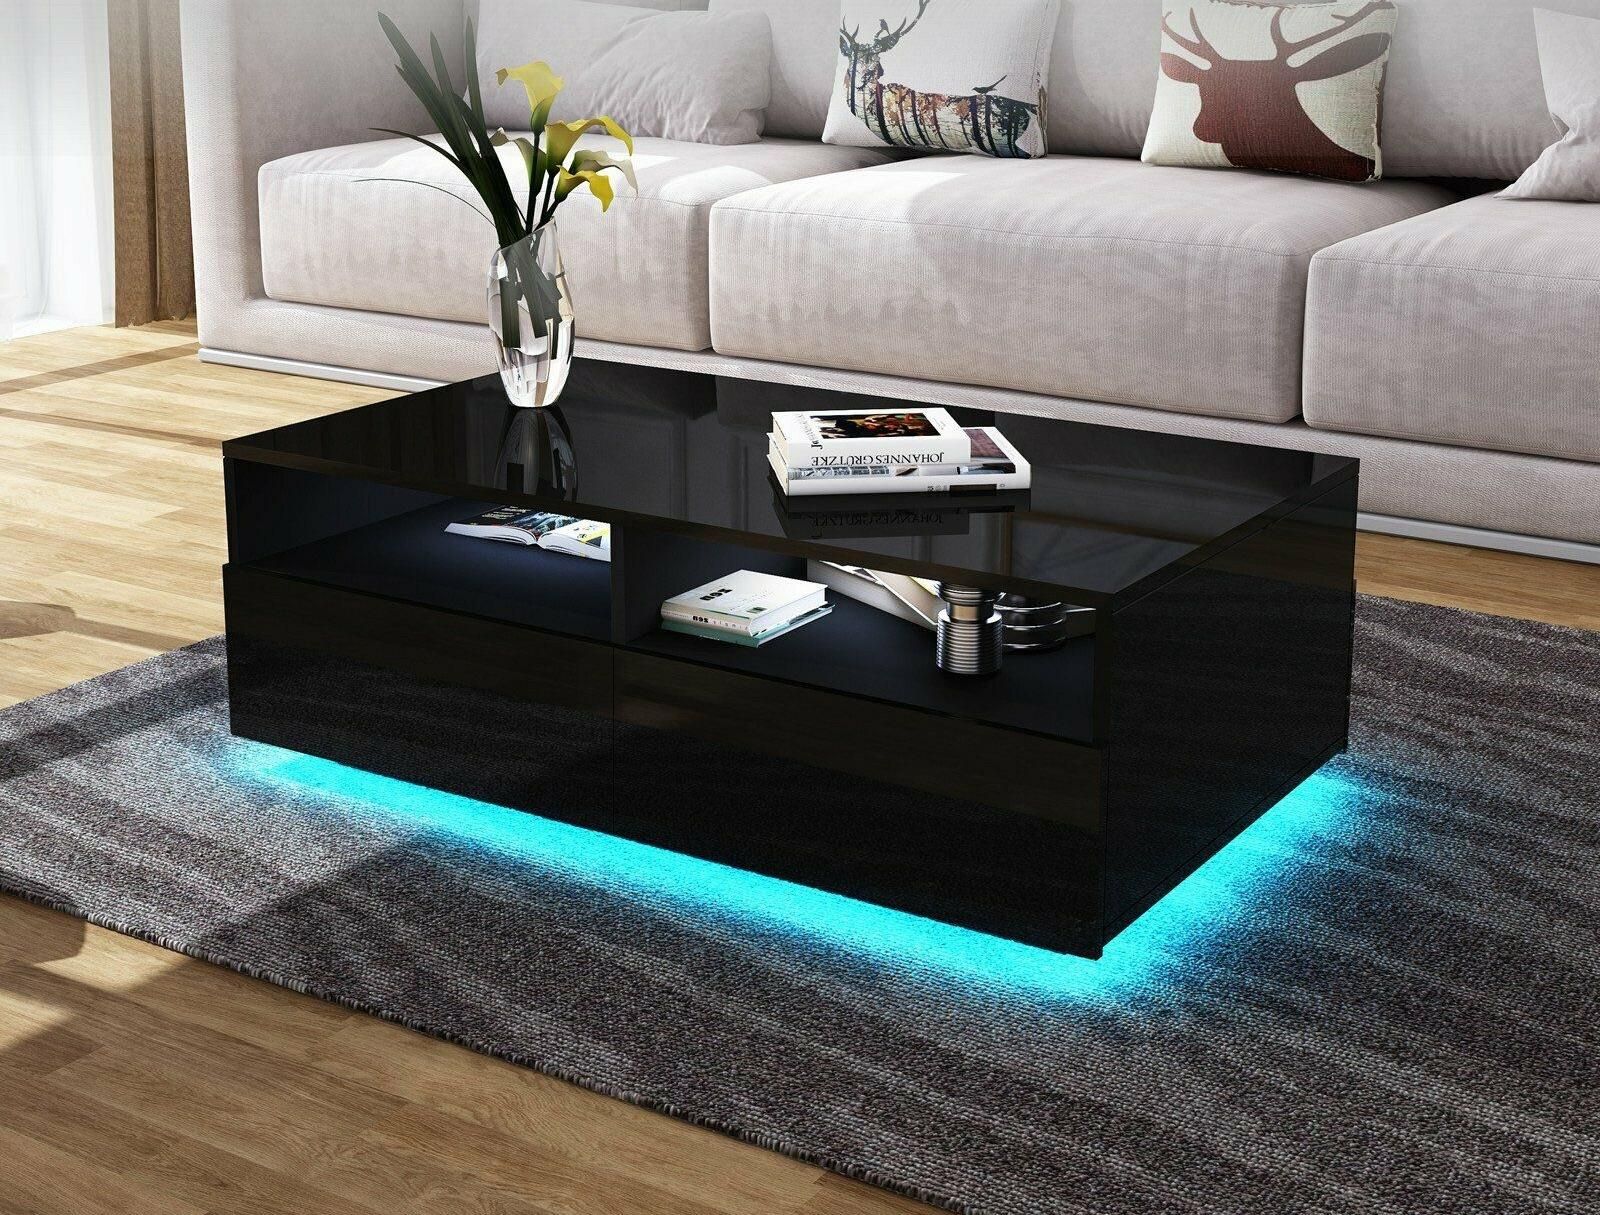 Living Room Rectangle Coffee Table 4 Drawers Rgb 16 Color Led Lights | Ebay With Led Coffee Tables With 4 Drawers (View 12 of 15)